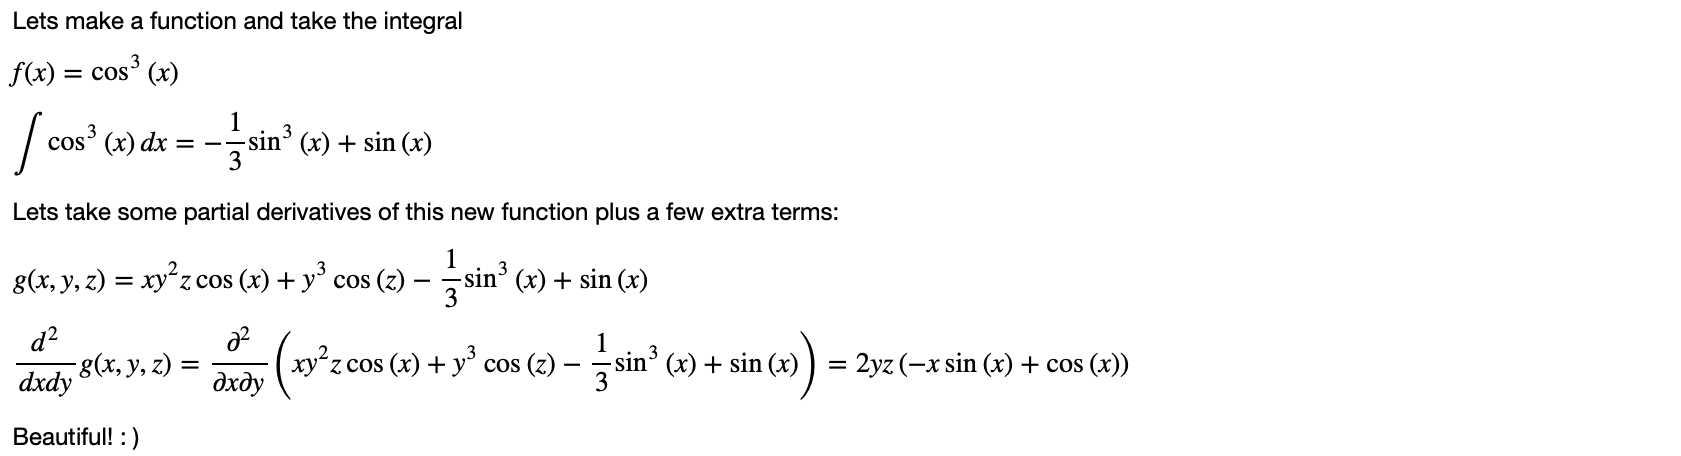 Image of Sympy Integrals and Derivatives